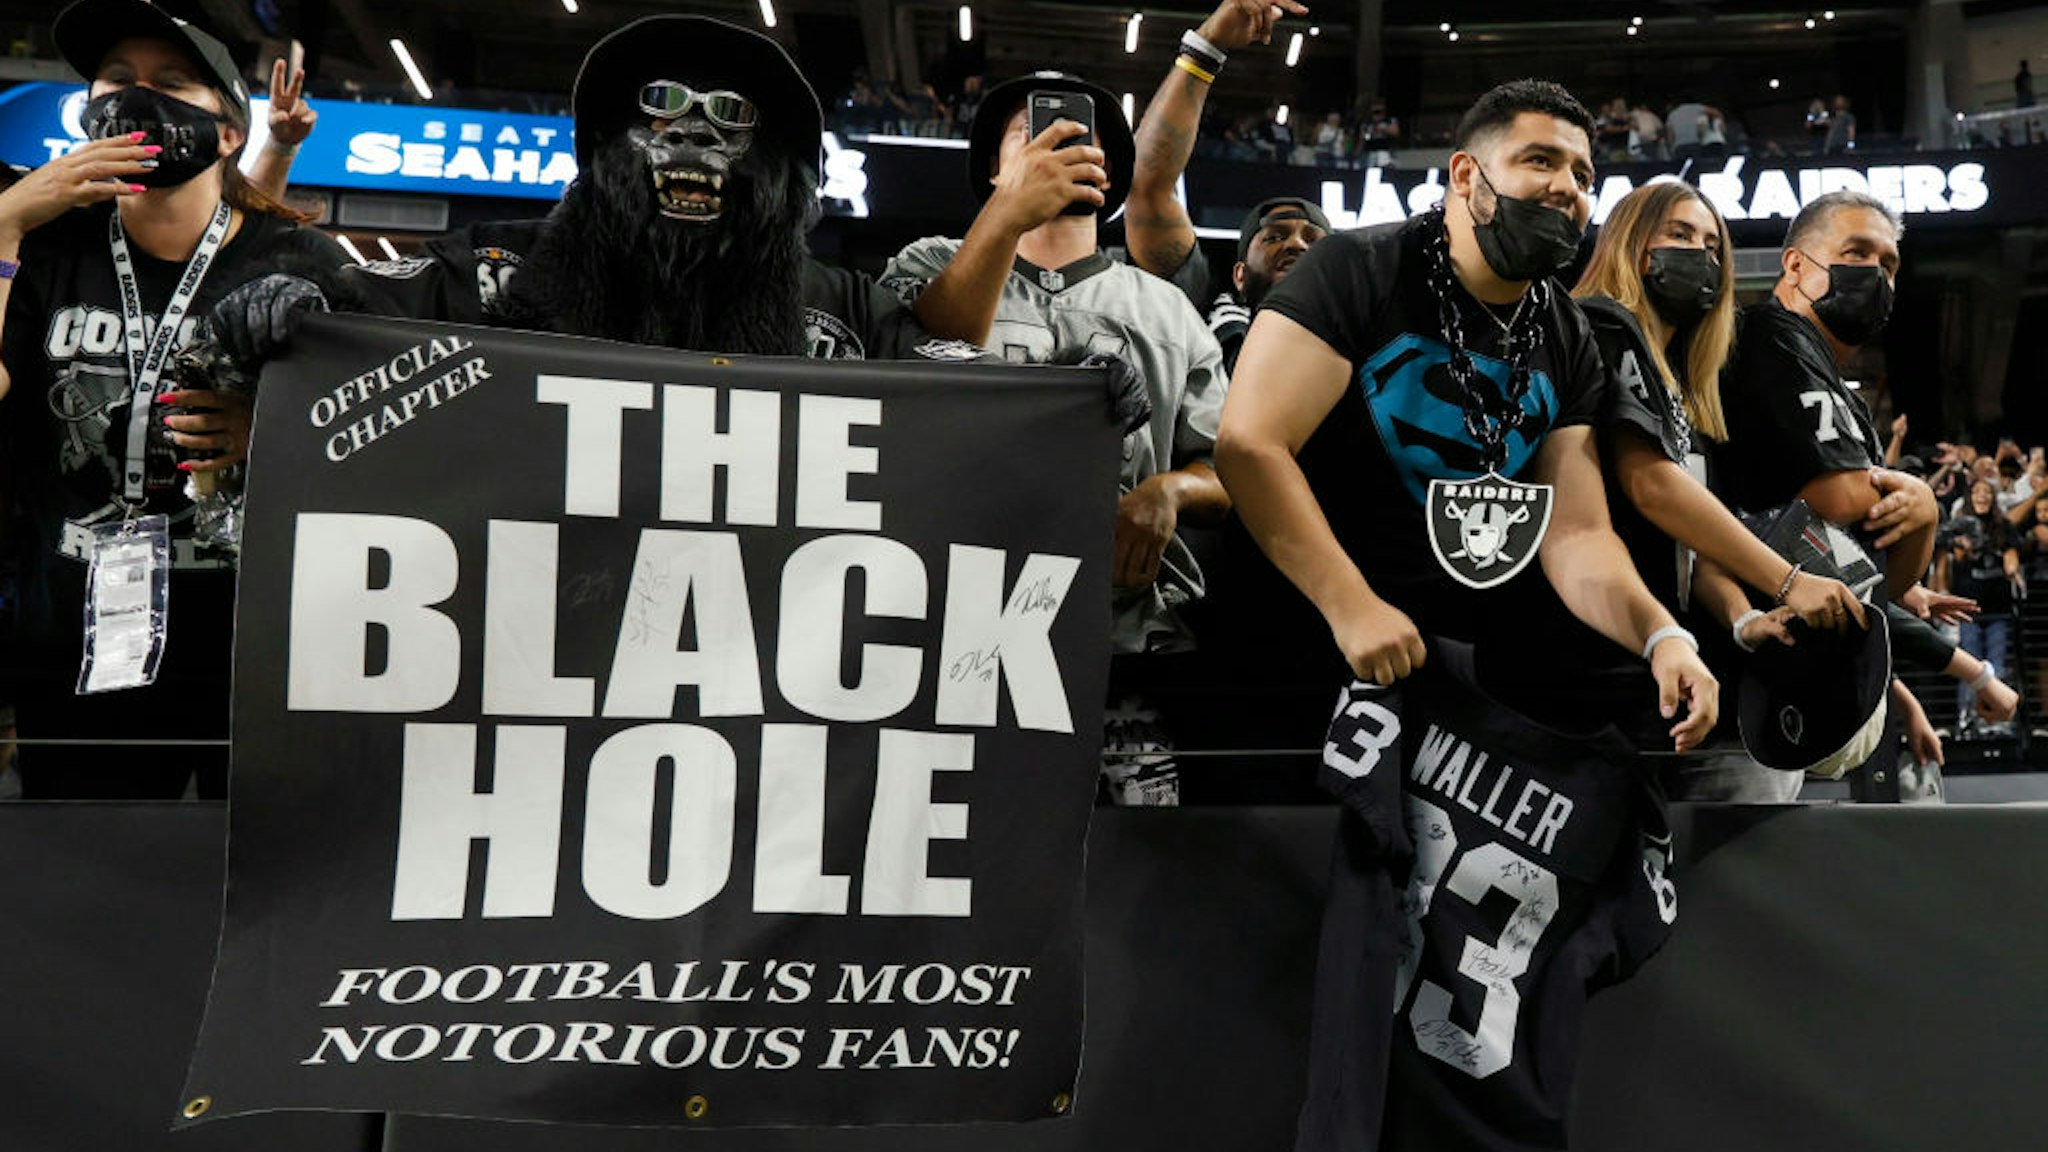 LAS VEGAS, NEVADA - AUGUST 14: Las Vegas Raiders fans react as players walk off the field following the team's 20-7 victory over the Seattle Seahawks during a preseason game at Allegiant Stadium on August 14, 2021 in Las Vegas, Nevada. (Photo by Ethan Miller/Getty Images)